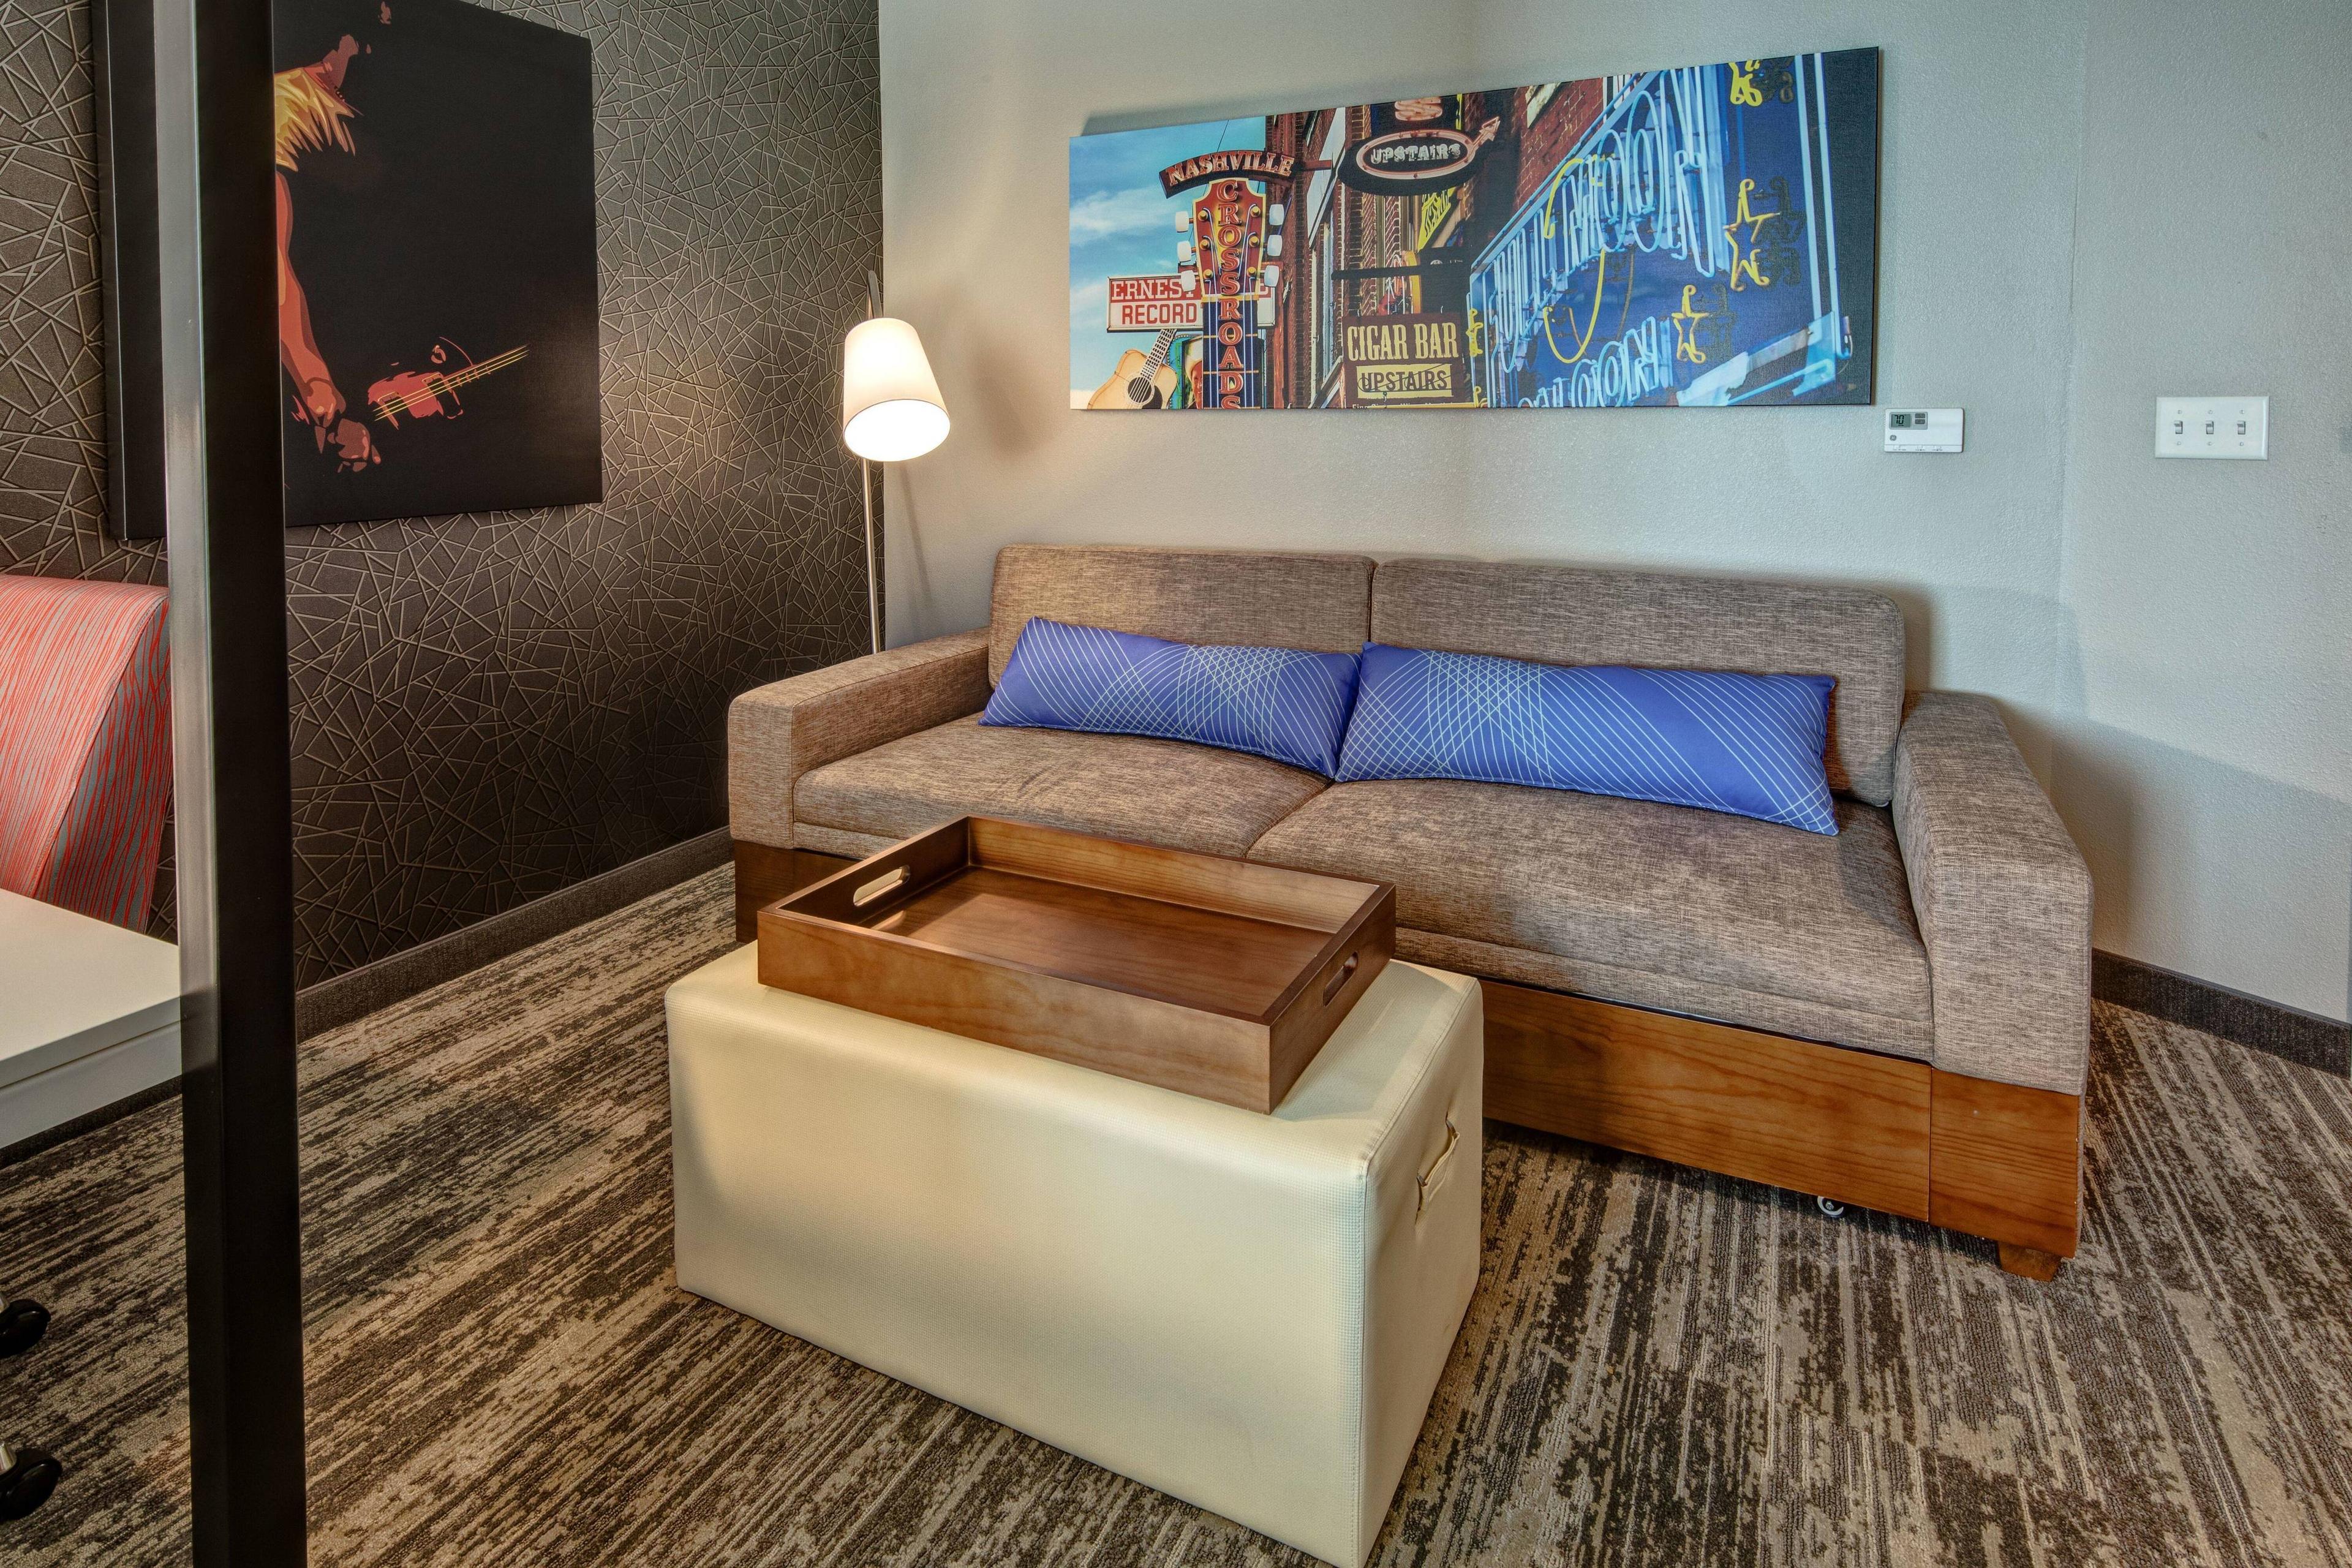 All of our 134 suites feature the West Elm Trundle bed in the living area